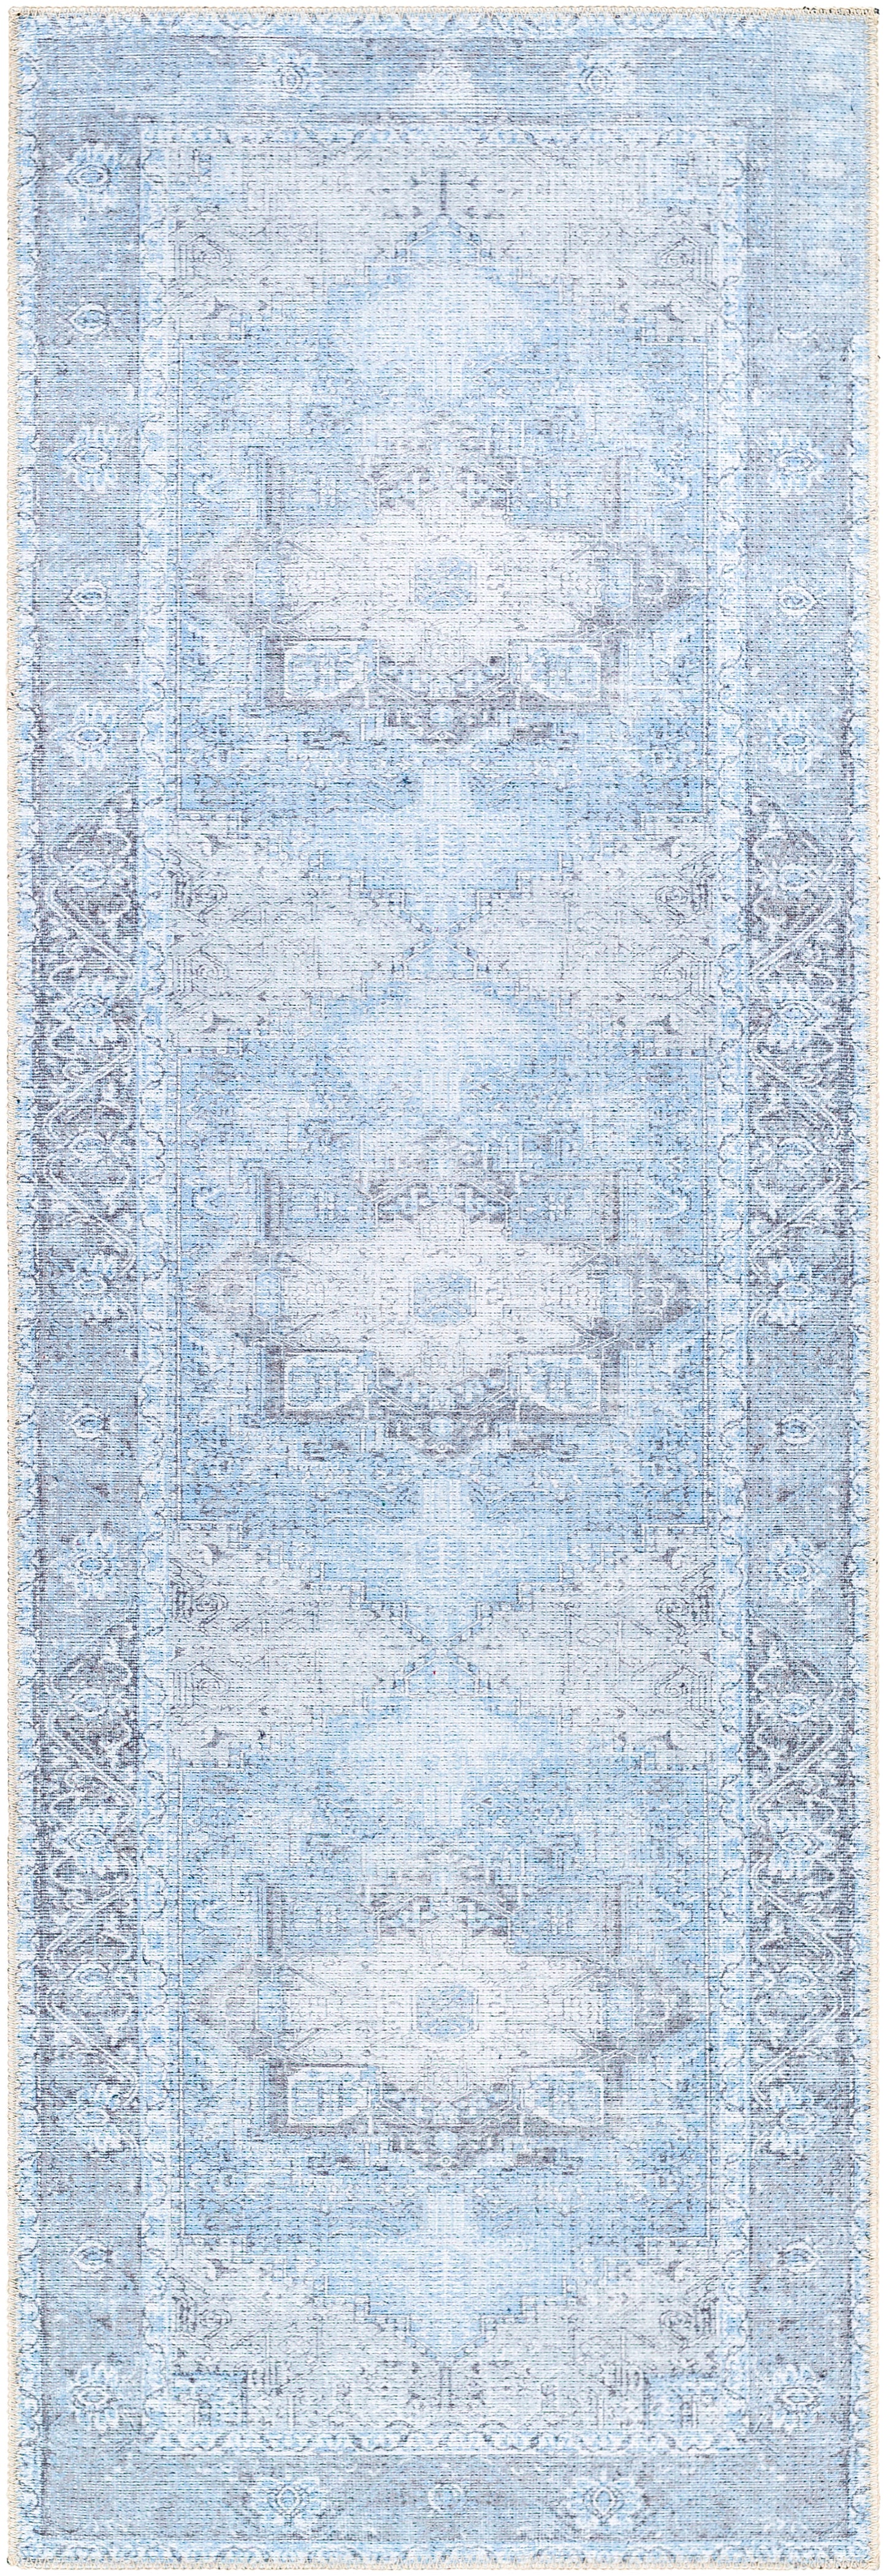 Amelie 23044 Machine Woven Synthetic Blend Indoor Area Rug by Surya Rugs